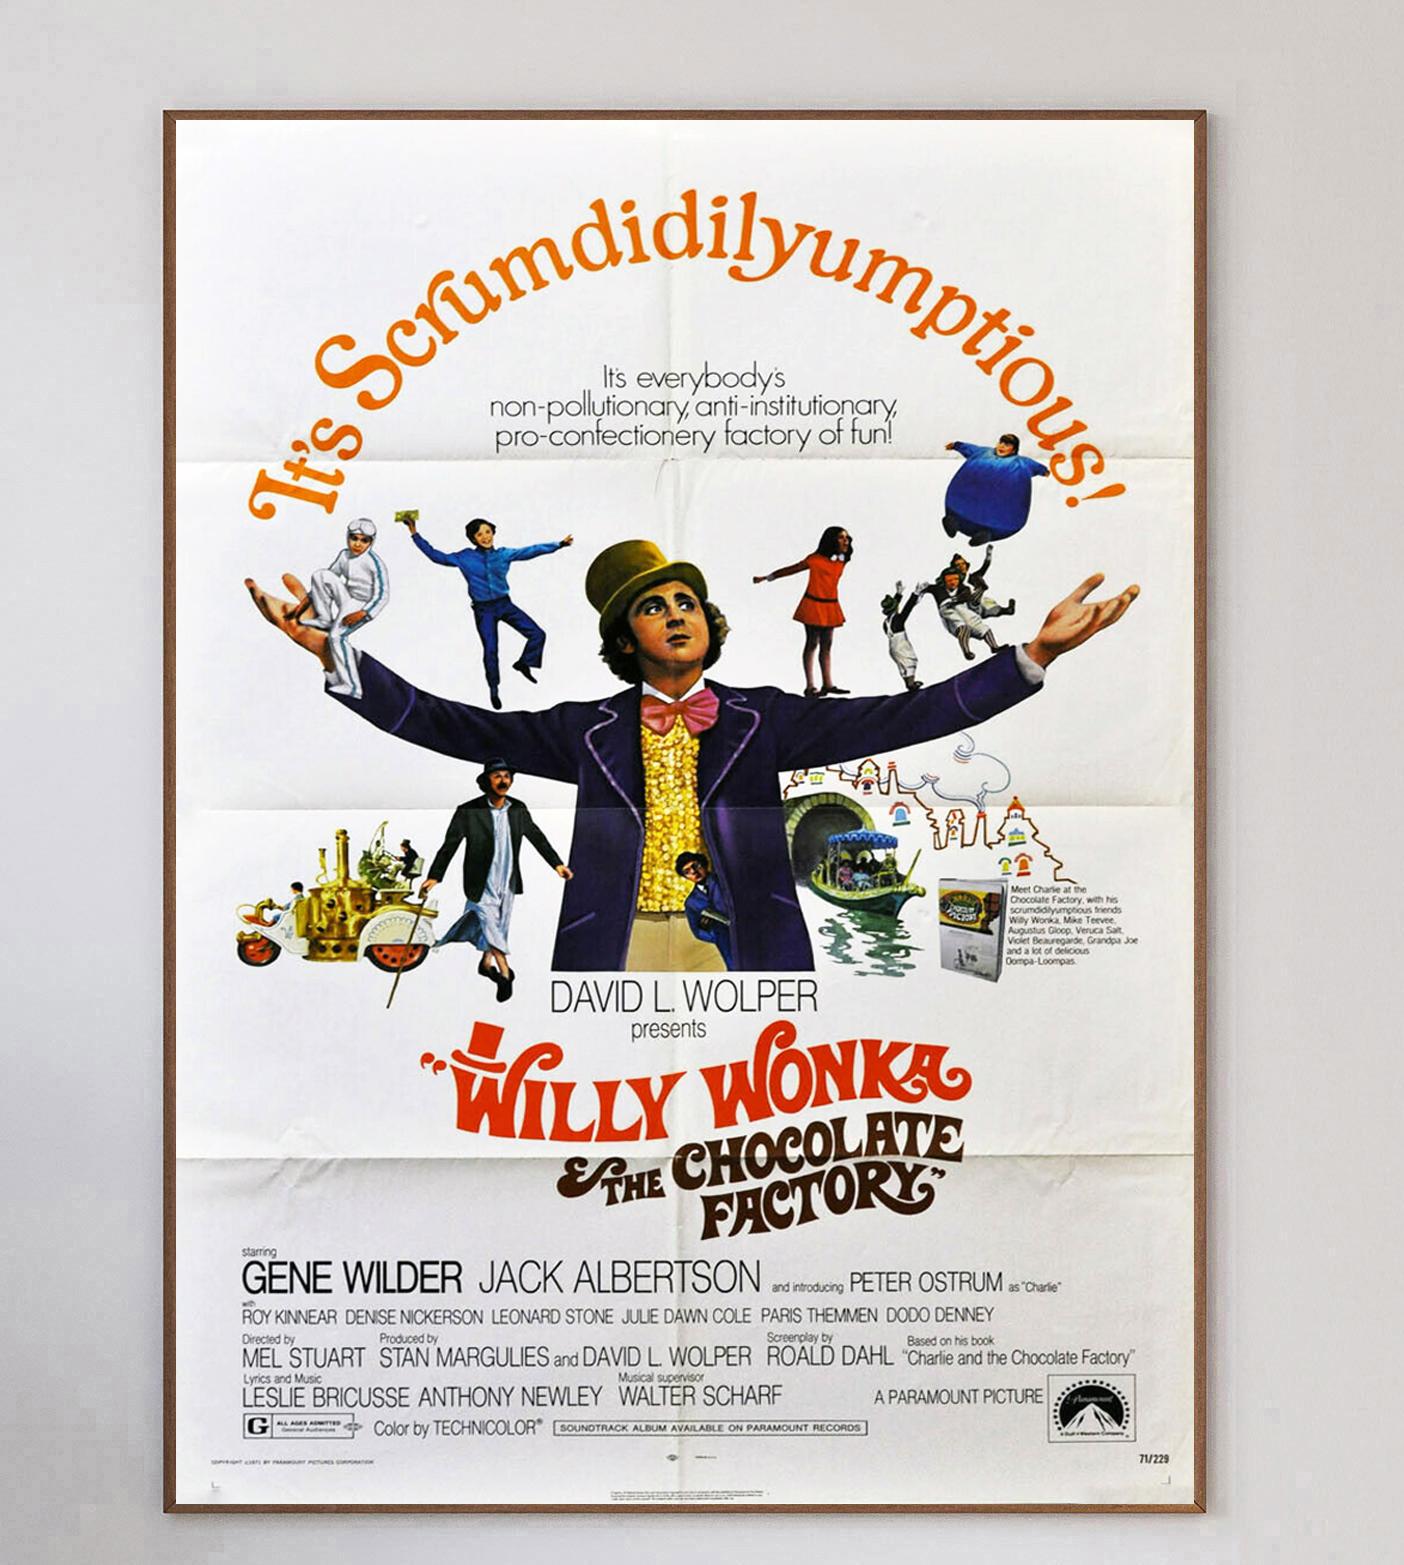 Featuring an all-time great performance from Gene Wilder as the titular Willy Wonka, 